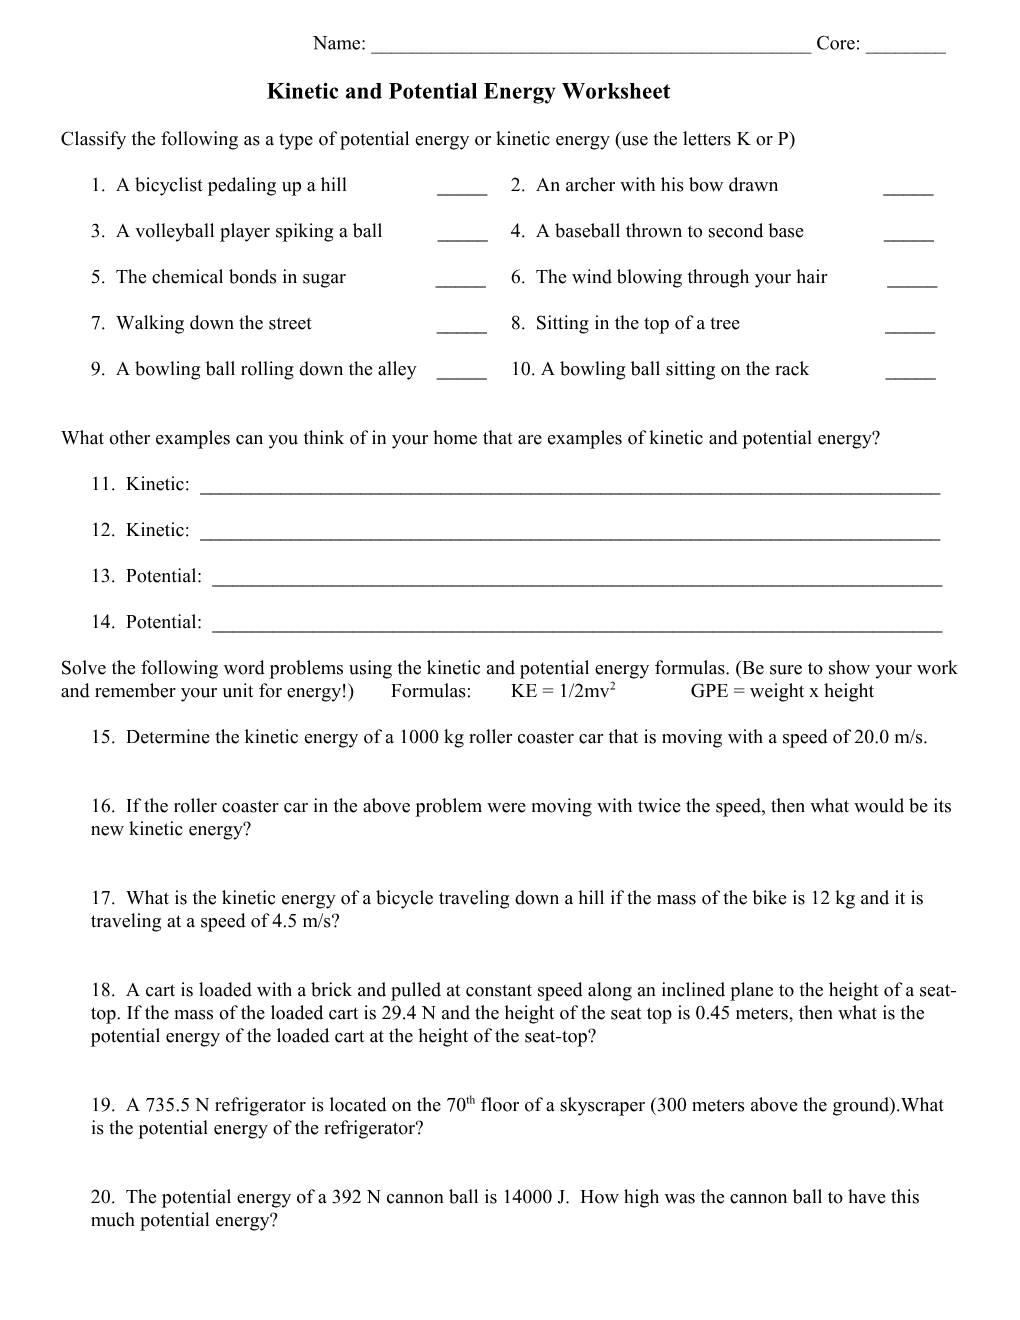 Kinetic and Potential Energy Worksheet Name ______